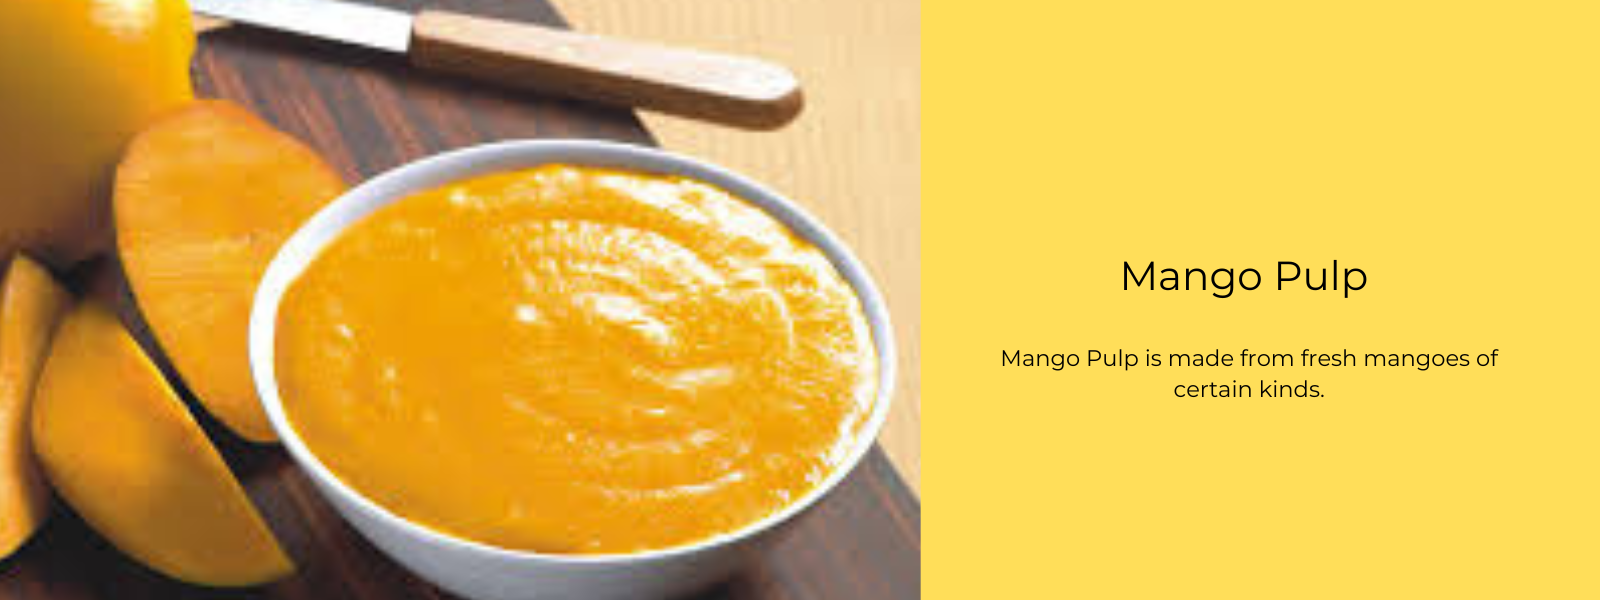 Mango Pulp - Health Benefits, Uses and Important Facts